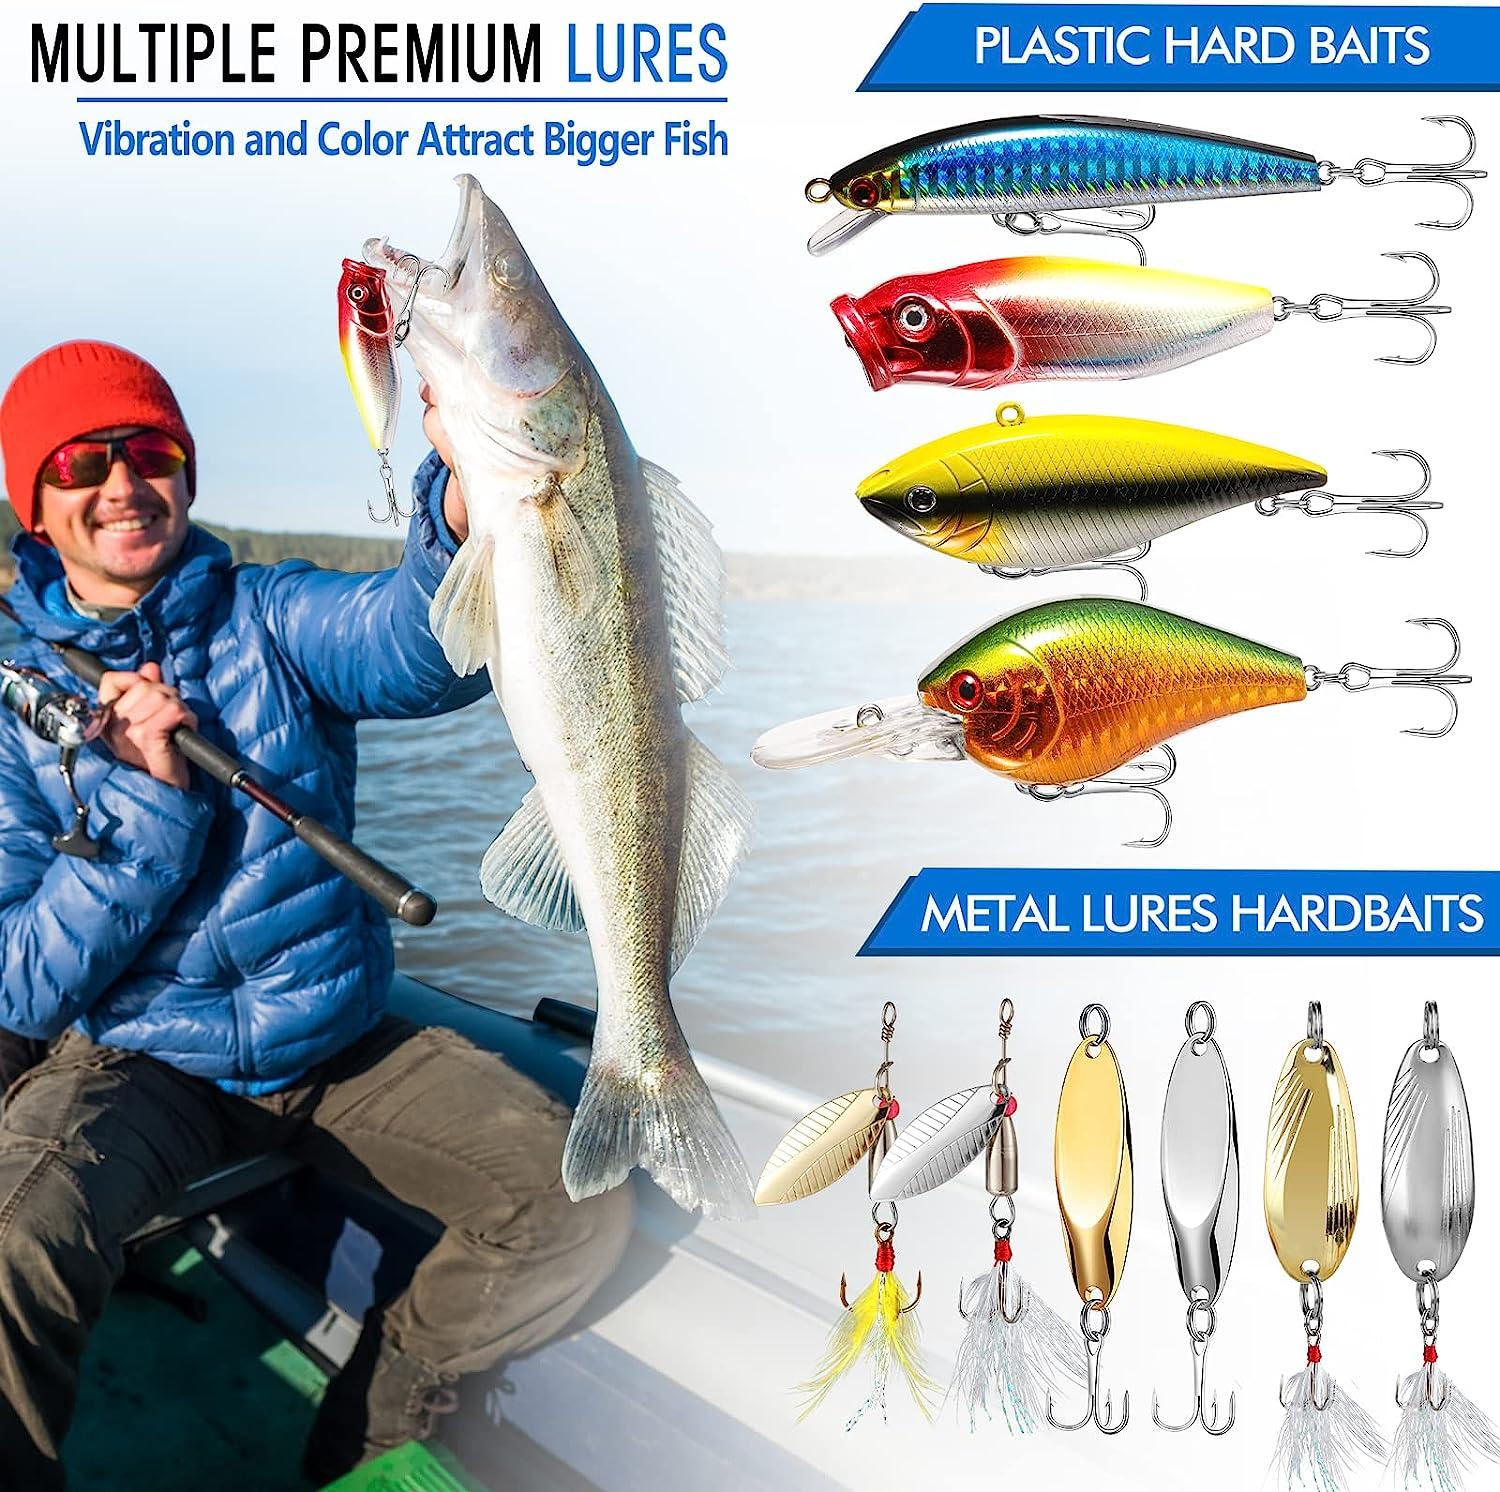 PLUSINNO Fishing Lures Baits Tackle Including Crankbaits, Spinnerbaits,  Plastic Worms, Jigs, Topwater Lures, Tackle Box and More Fishing Gear Lures  Kit Set, 210Pcs Fishing Lure Tackle…: Buy Online at Best Price in